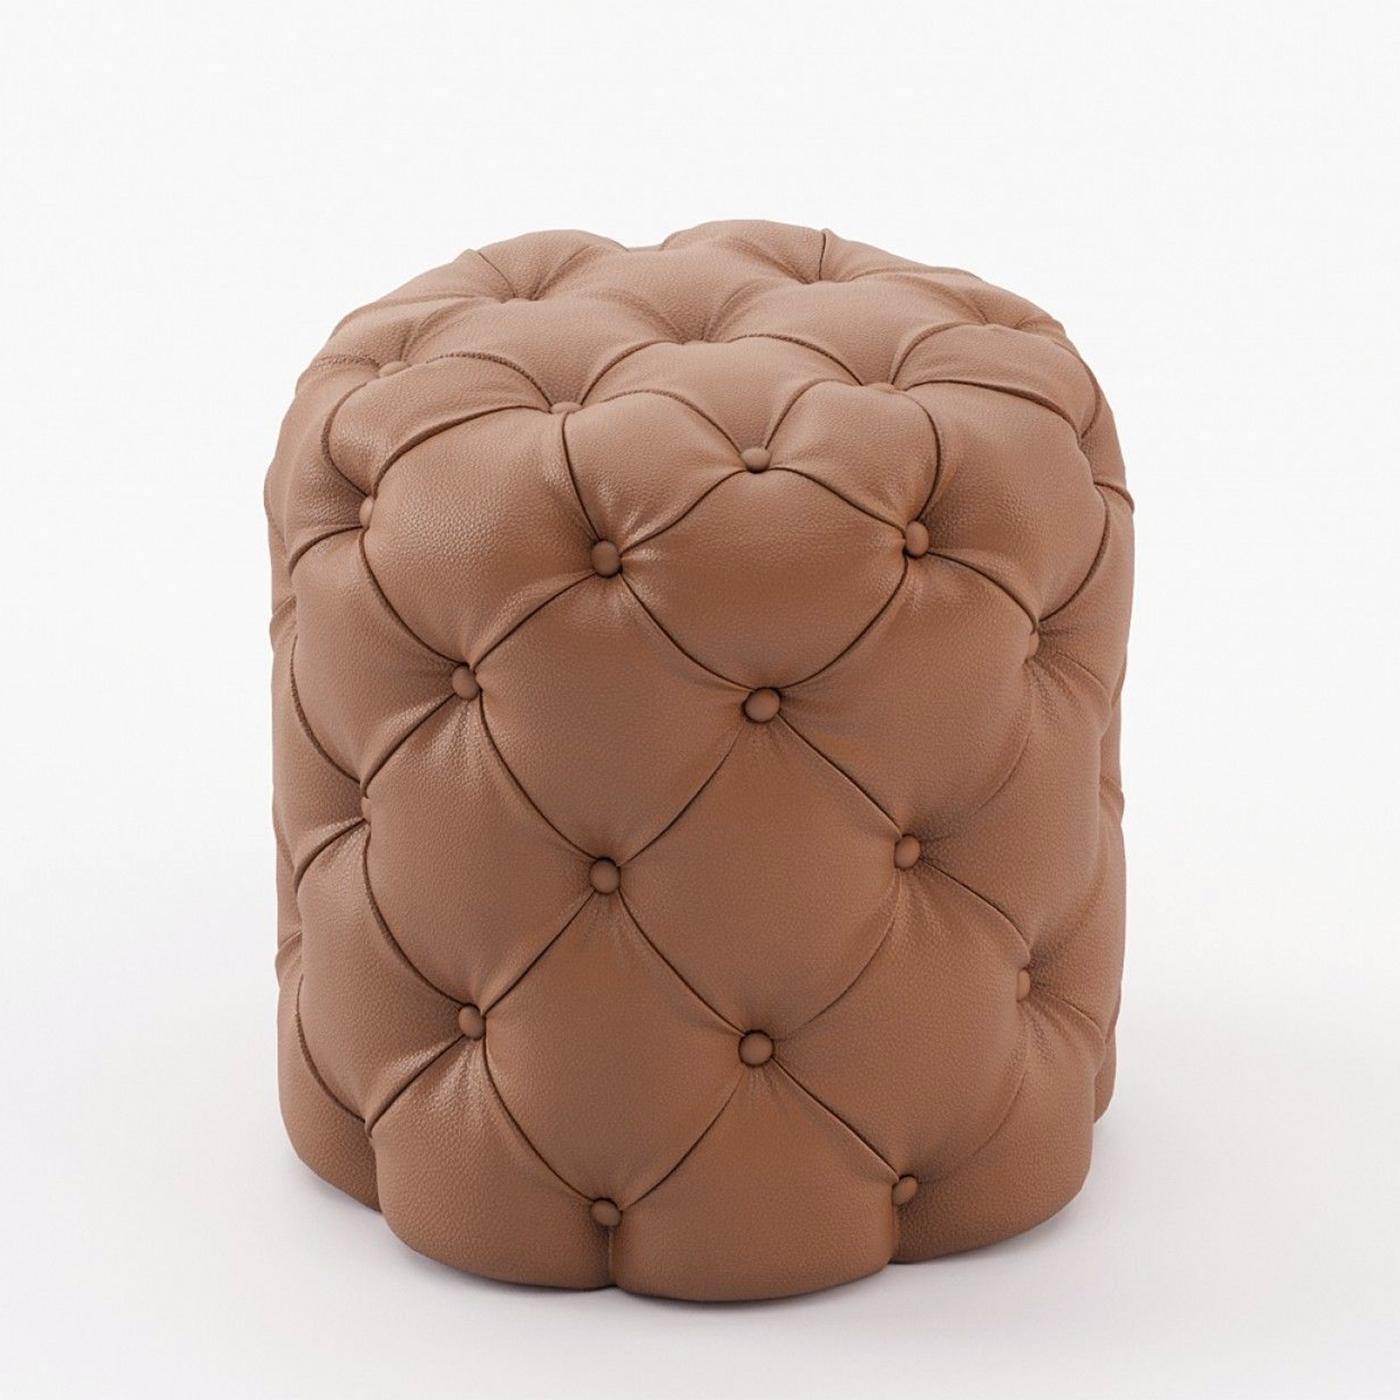 Pouf British Brown Leather with wooden structure,
upholstered and covered with brown leather capitonated
with button. Also available in other leather colors, on request.